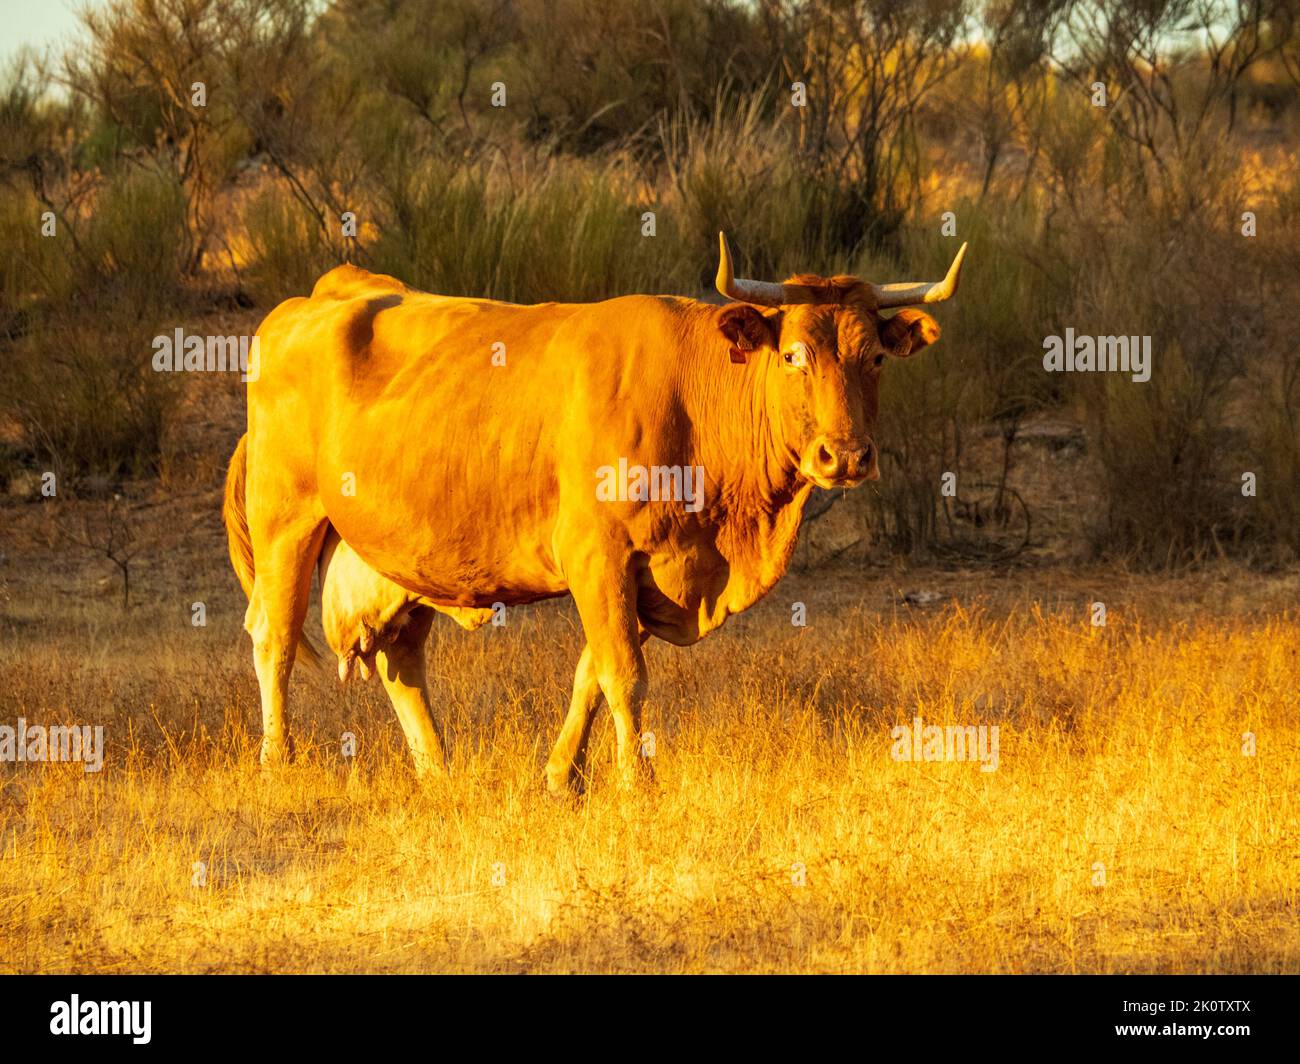 Cattle at sunset in Los Barruecos, Cáceres, Spain Stock Photo